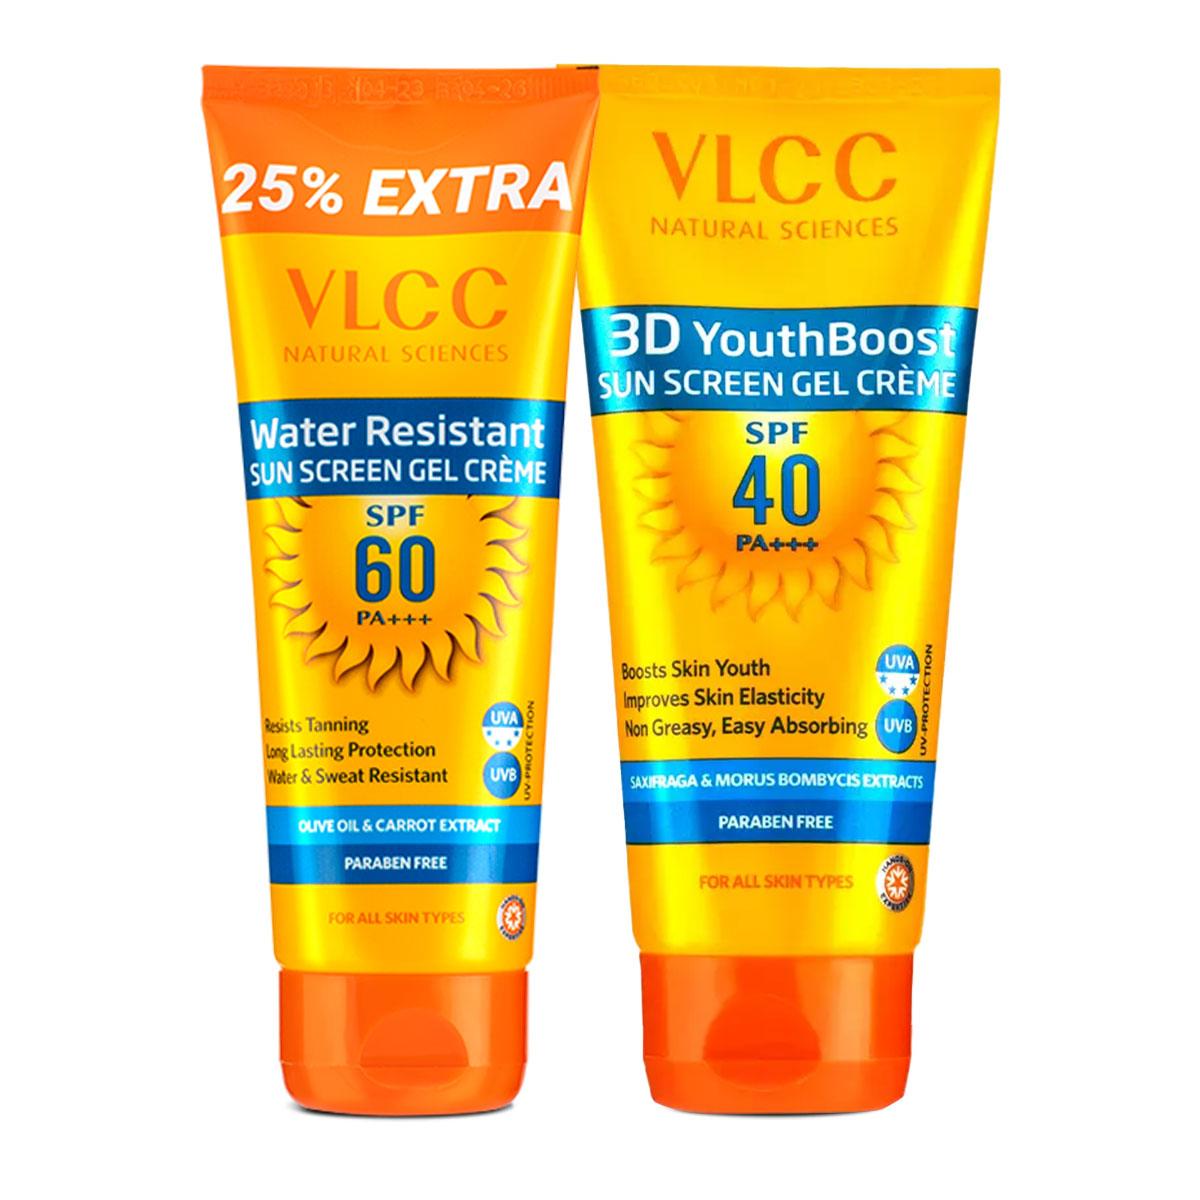 VLCC Water Resistant SPF 60 PA+++ Sunscreen & 3D Youth Boost SPF40 +++ Sunscreen